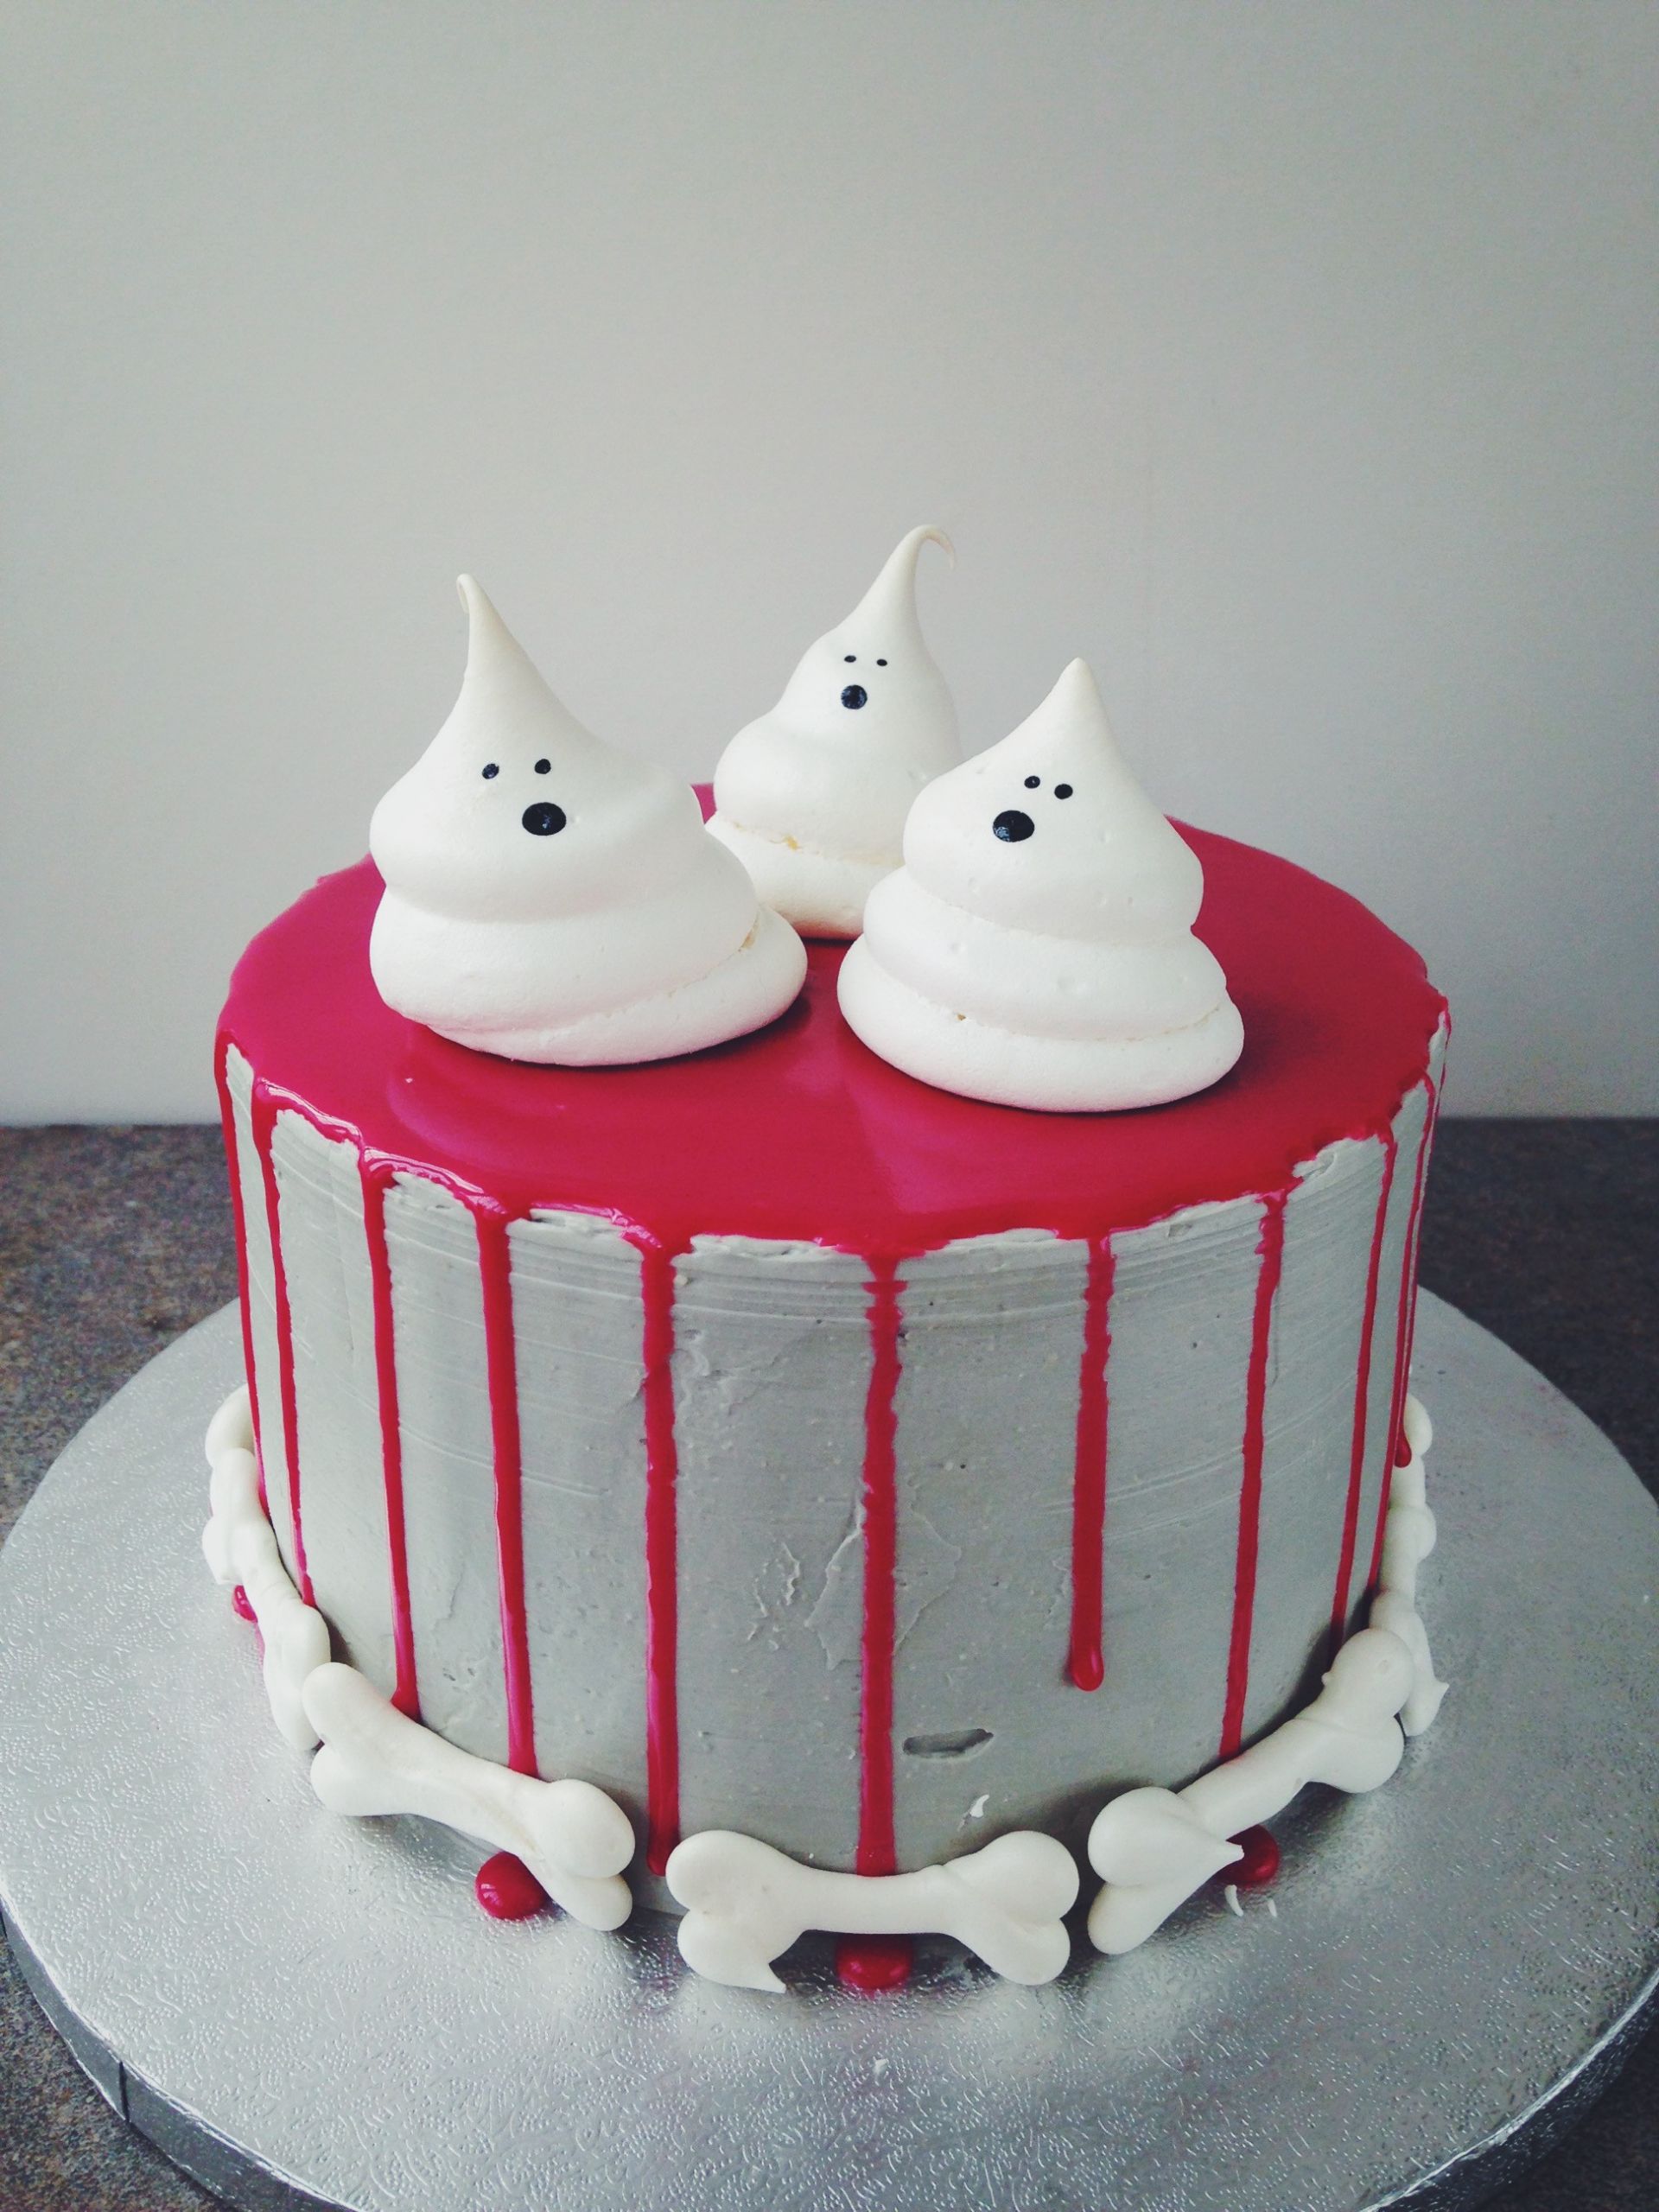 Spooky Halloween Cakes Luxury Spooky Halloween Blood Drip Cake with Meringue Ghosts and